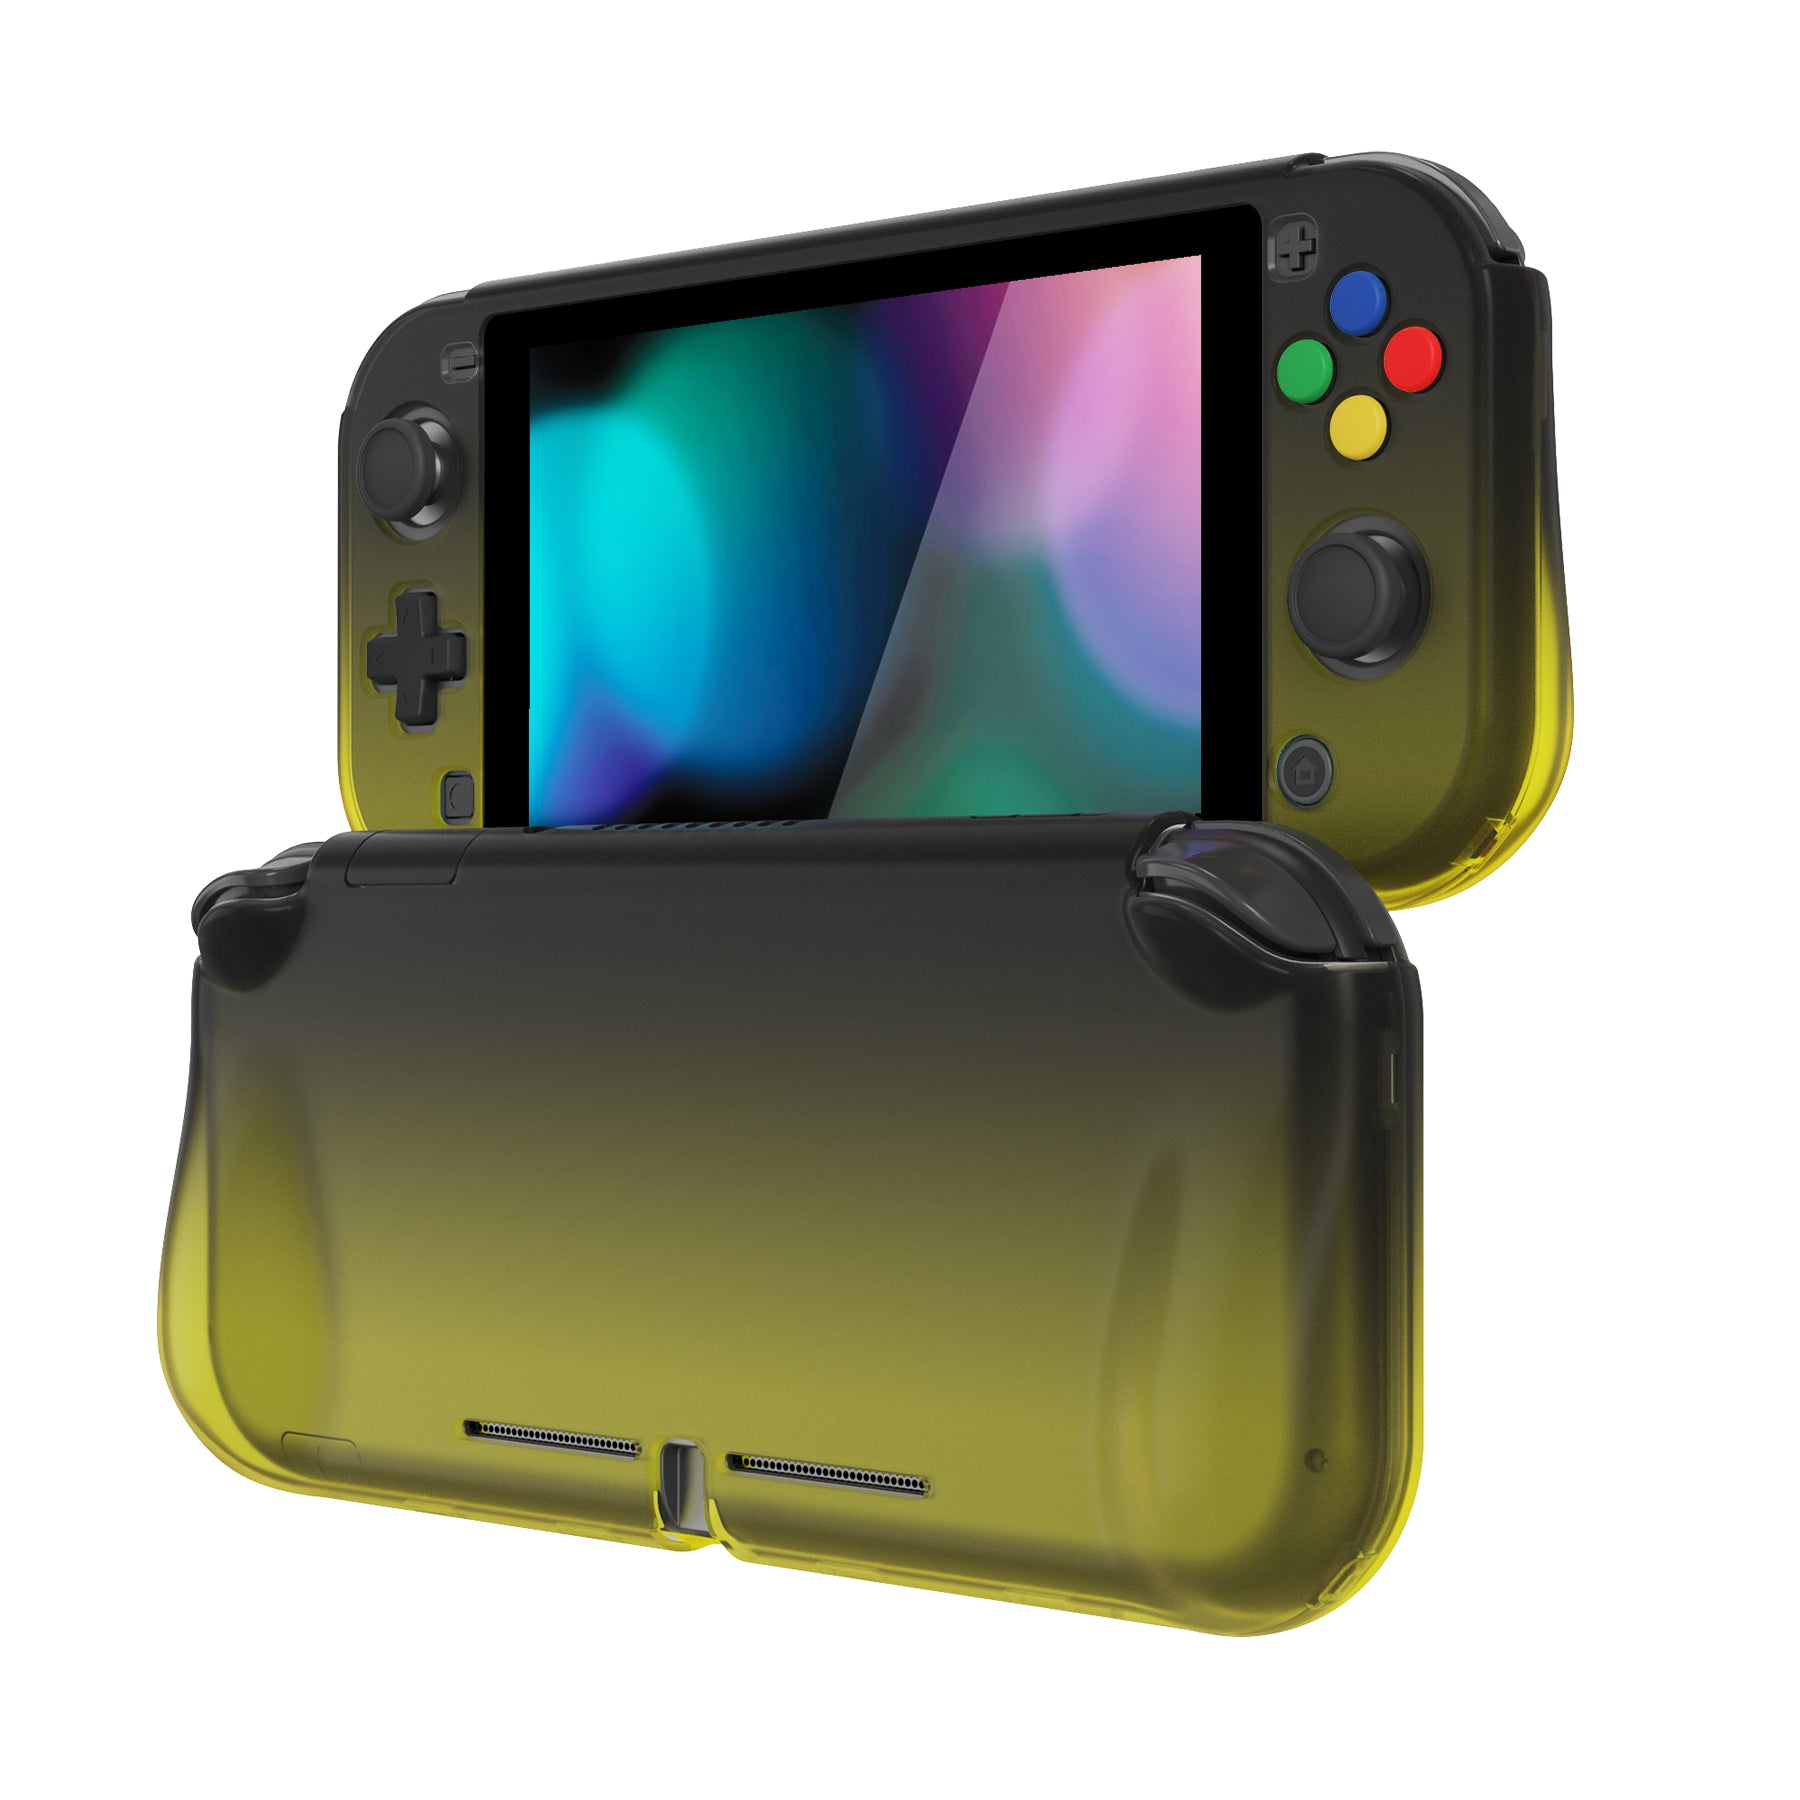 PlayVital ZealProtect Protective Case for Nintendo Switch Lite, Hard Shell Ergonomic Grip Cover for Nintendo Switch Lite w/Screen Protector & Thumb Grip Caps & Button Caps - Gradient Black Yellown - PSLYP3014 playvital